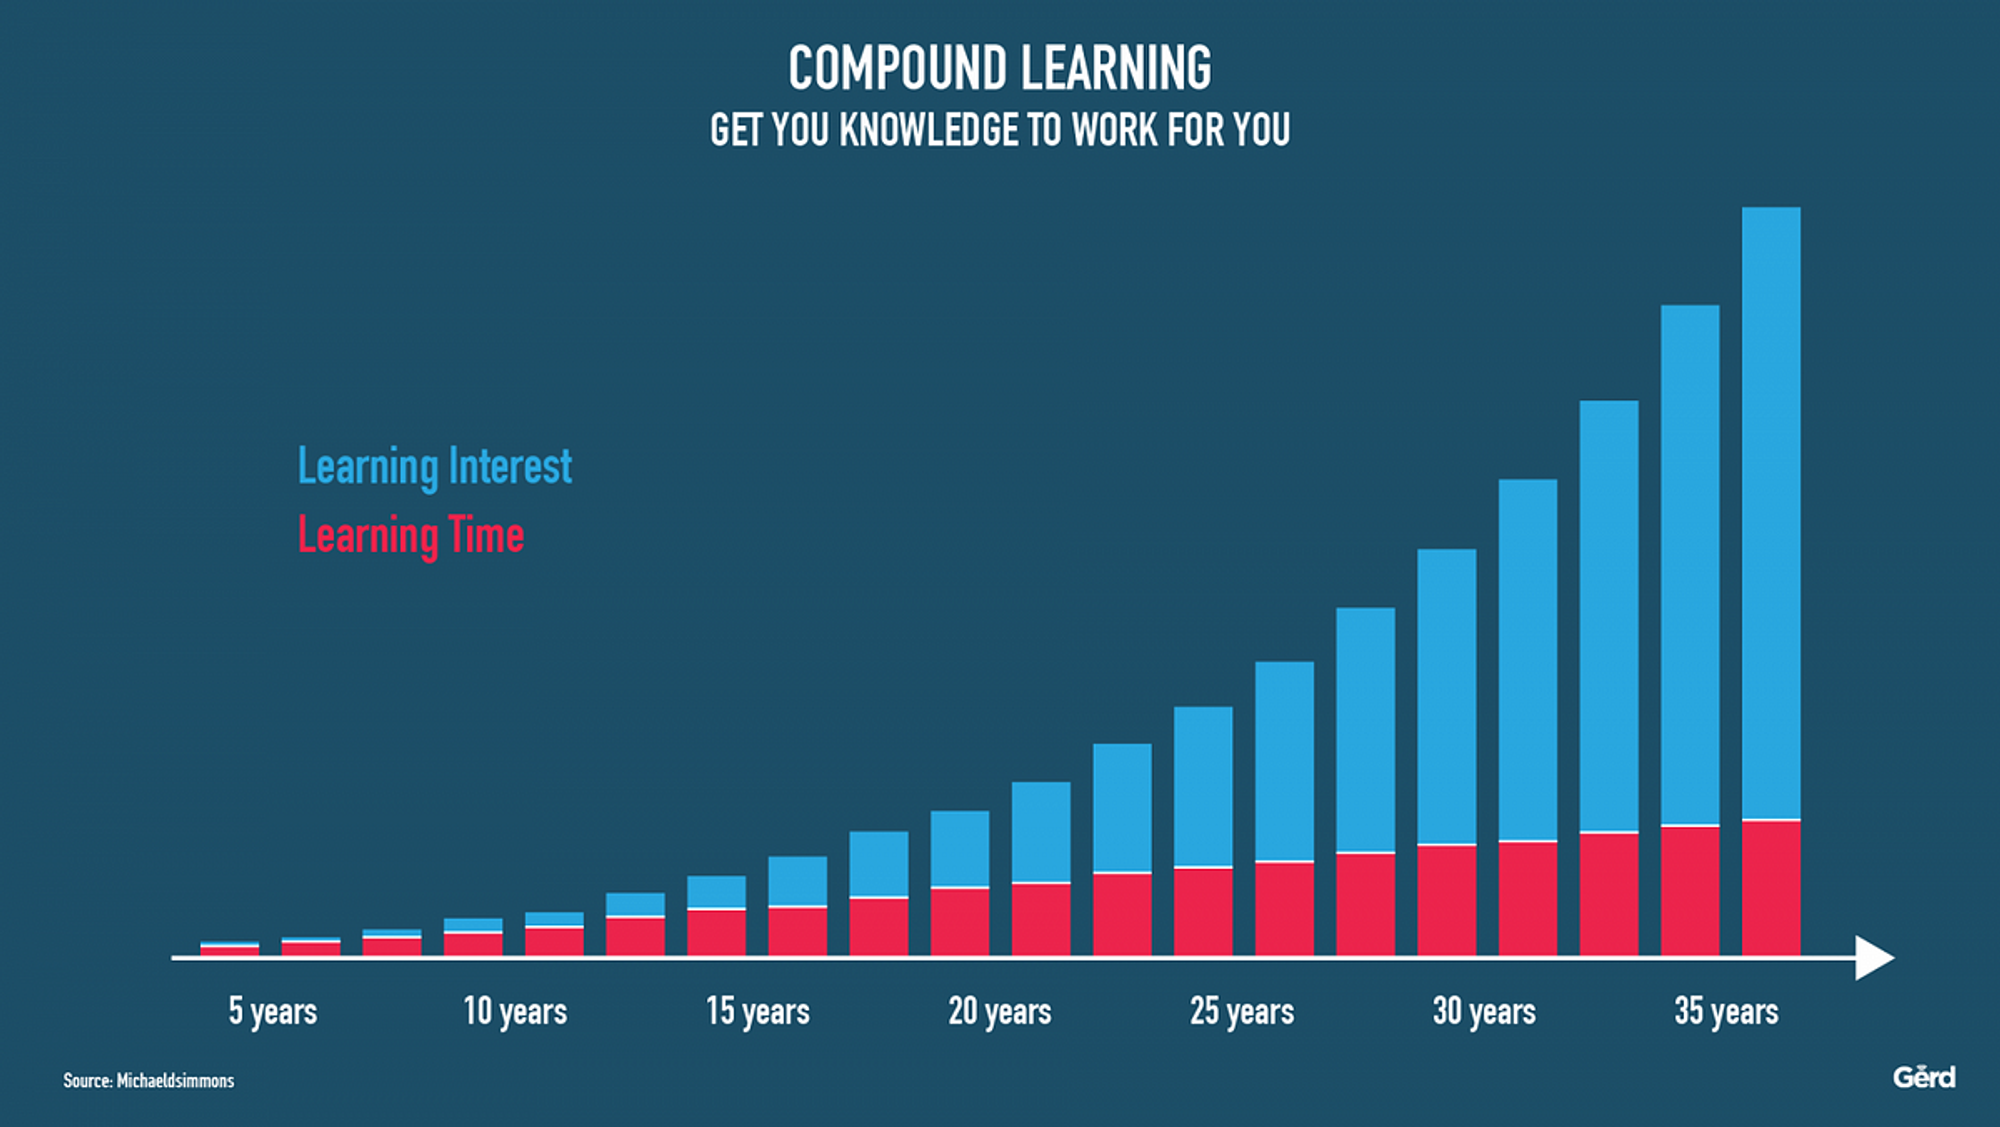 The Power of Compound Learning (riffing off Michael D Simmons)